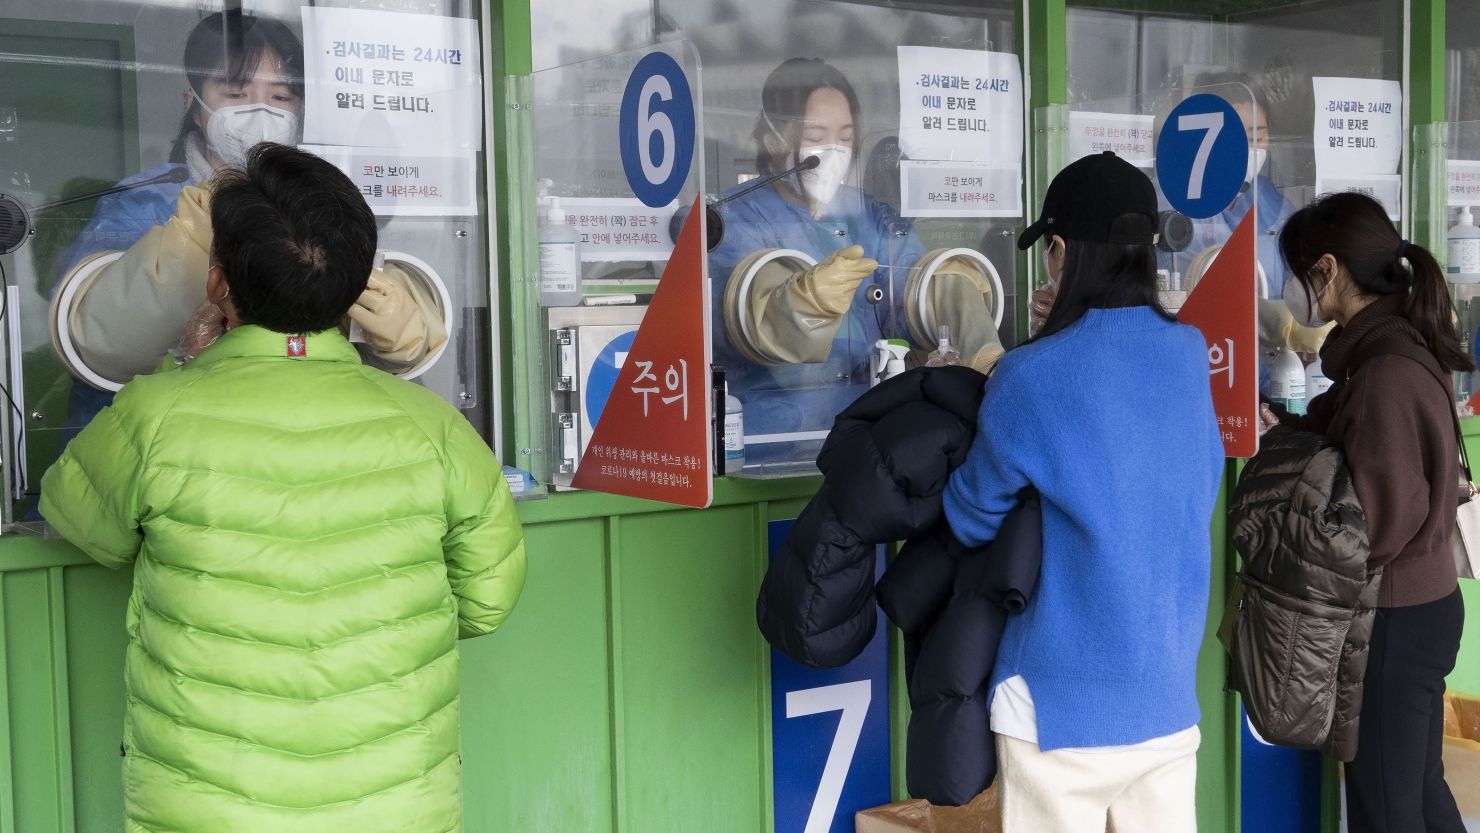 People wait to receive Covid-19 tests in Seoul, South Korea, on March 20.